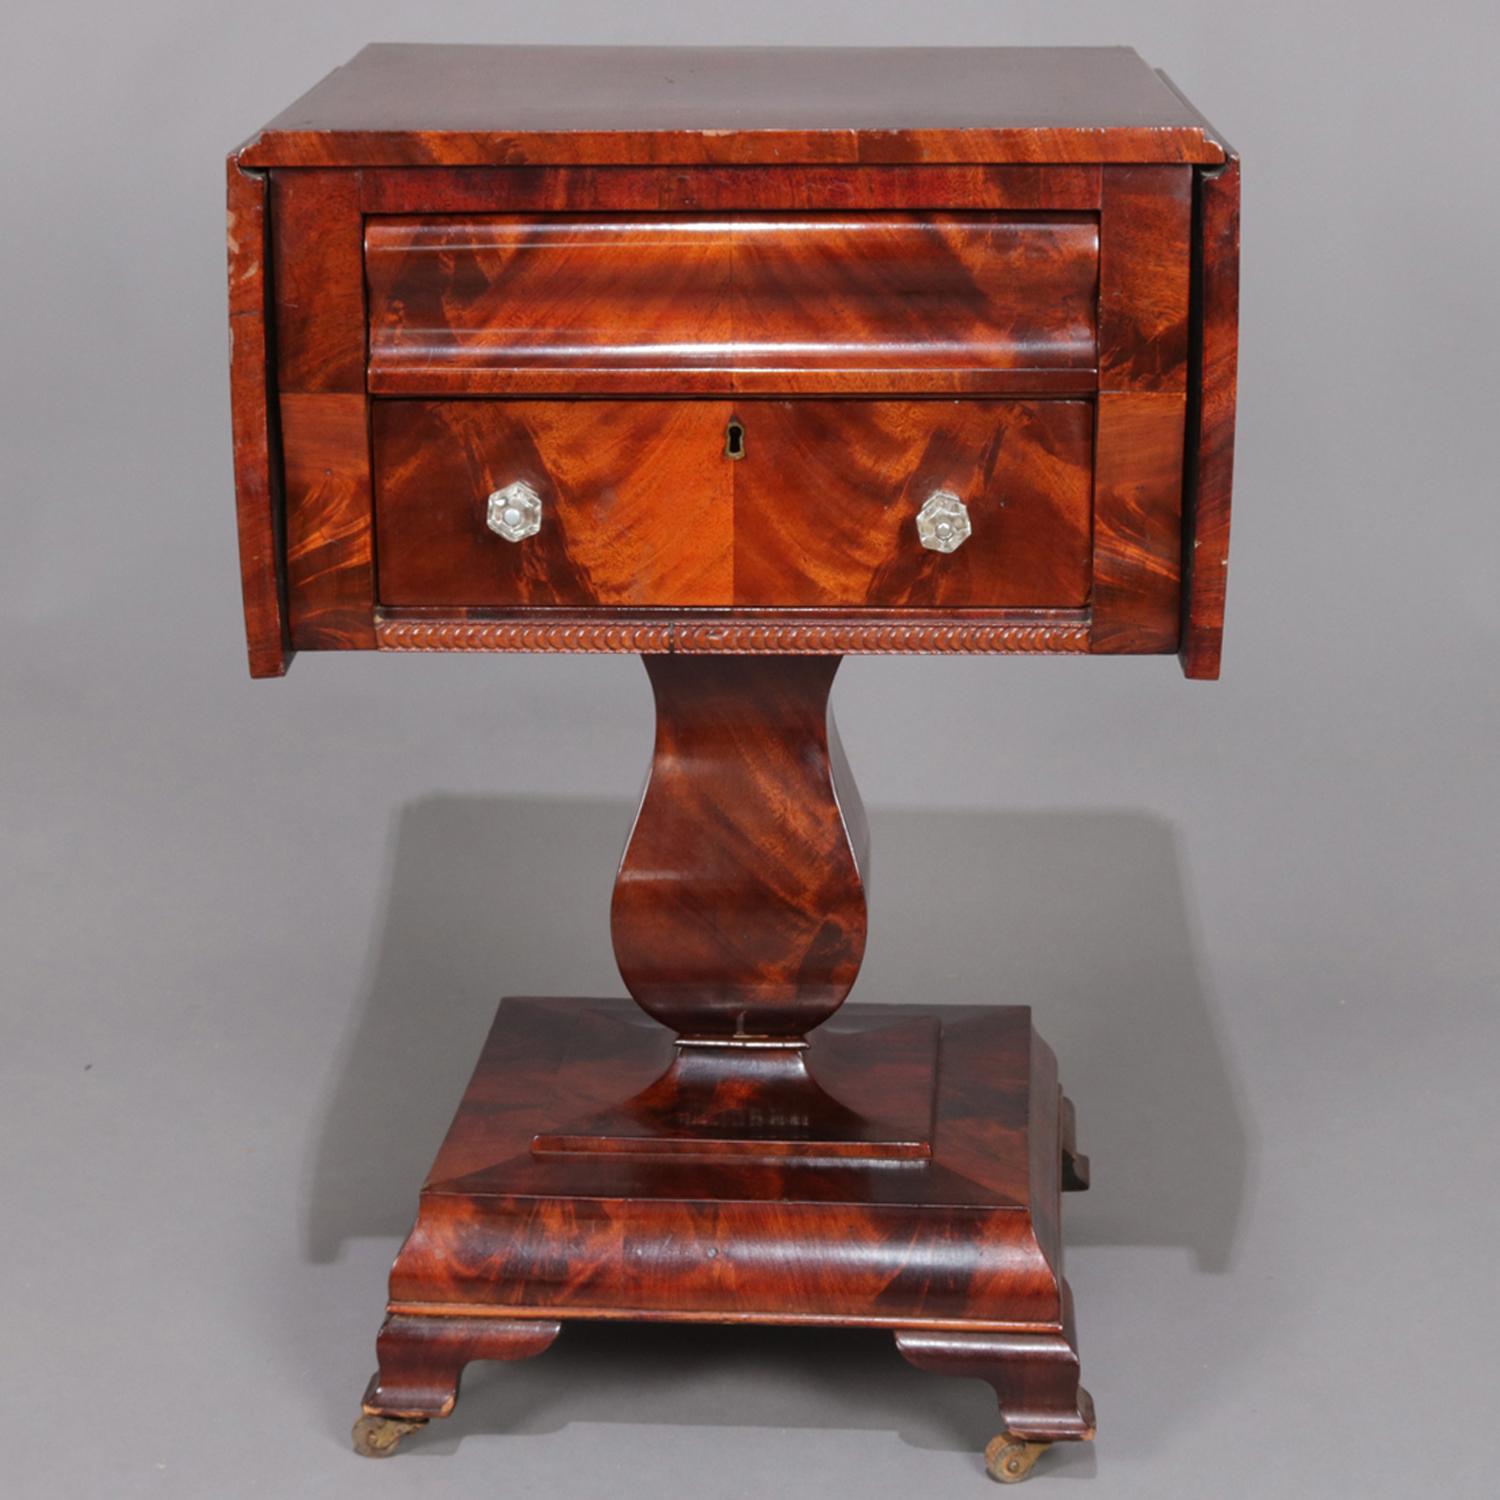 Antique American Empire sewing stand features flame mahogany construction with bookmatched two-drawer case and drop-leaf top seated on urn form pedestal above stepped and footed base, circa 1840

Measures: 30